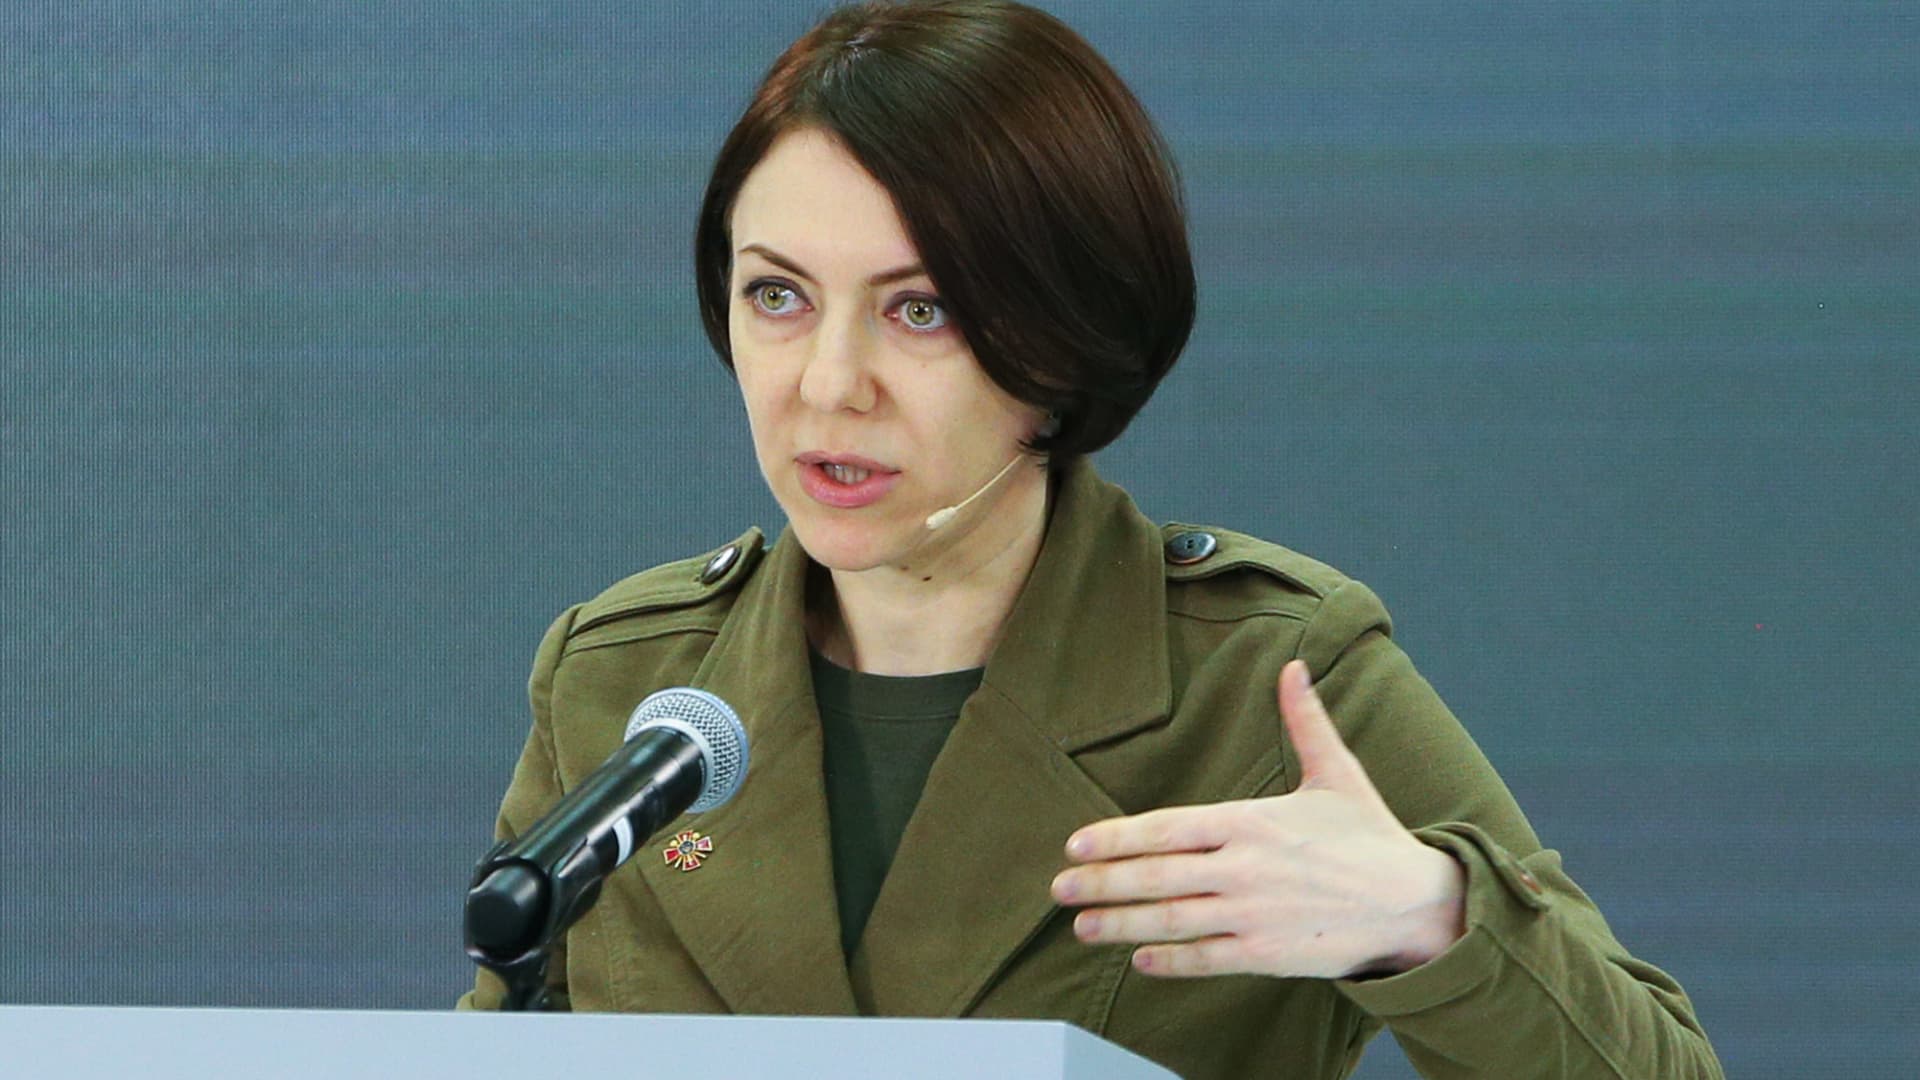 Ukrainian Deputy Defense Minister Hanna Maliar during a media briefing of the Security and Defense Forces of Ukraine in Kyiv on April 13, 2023.